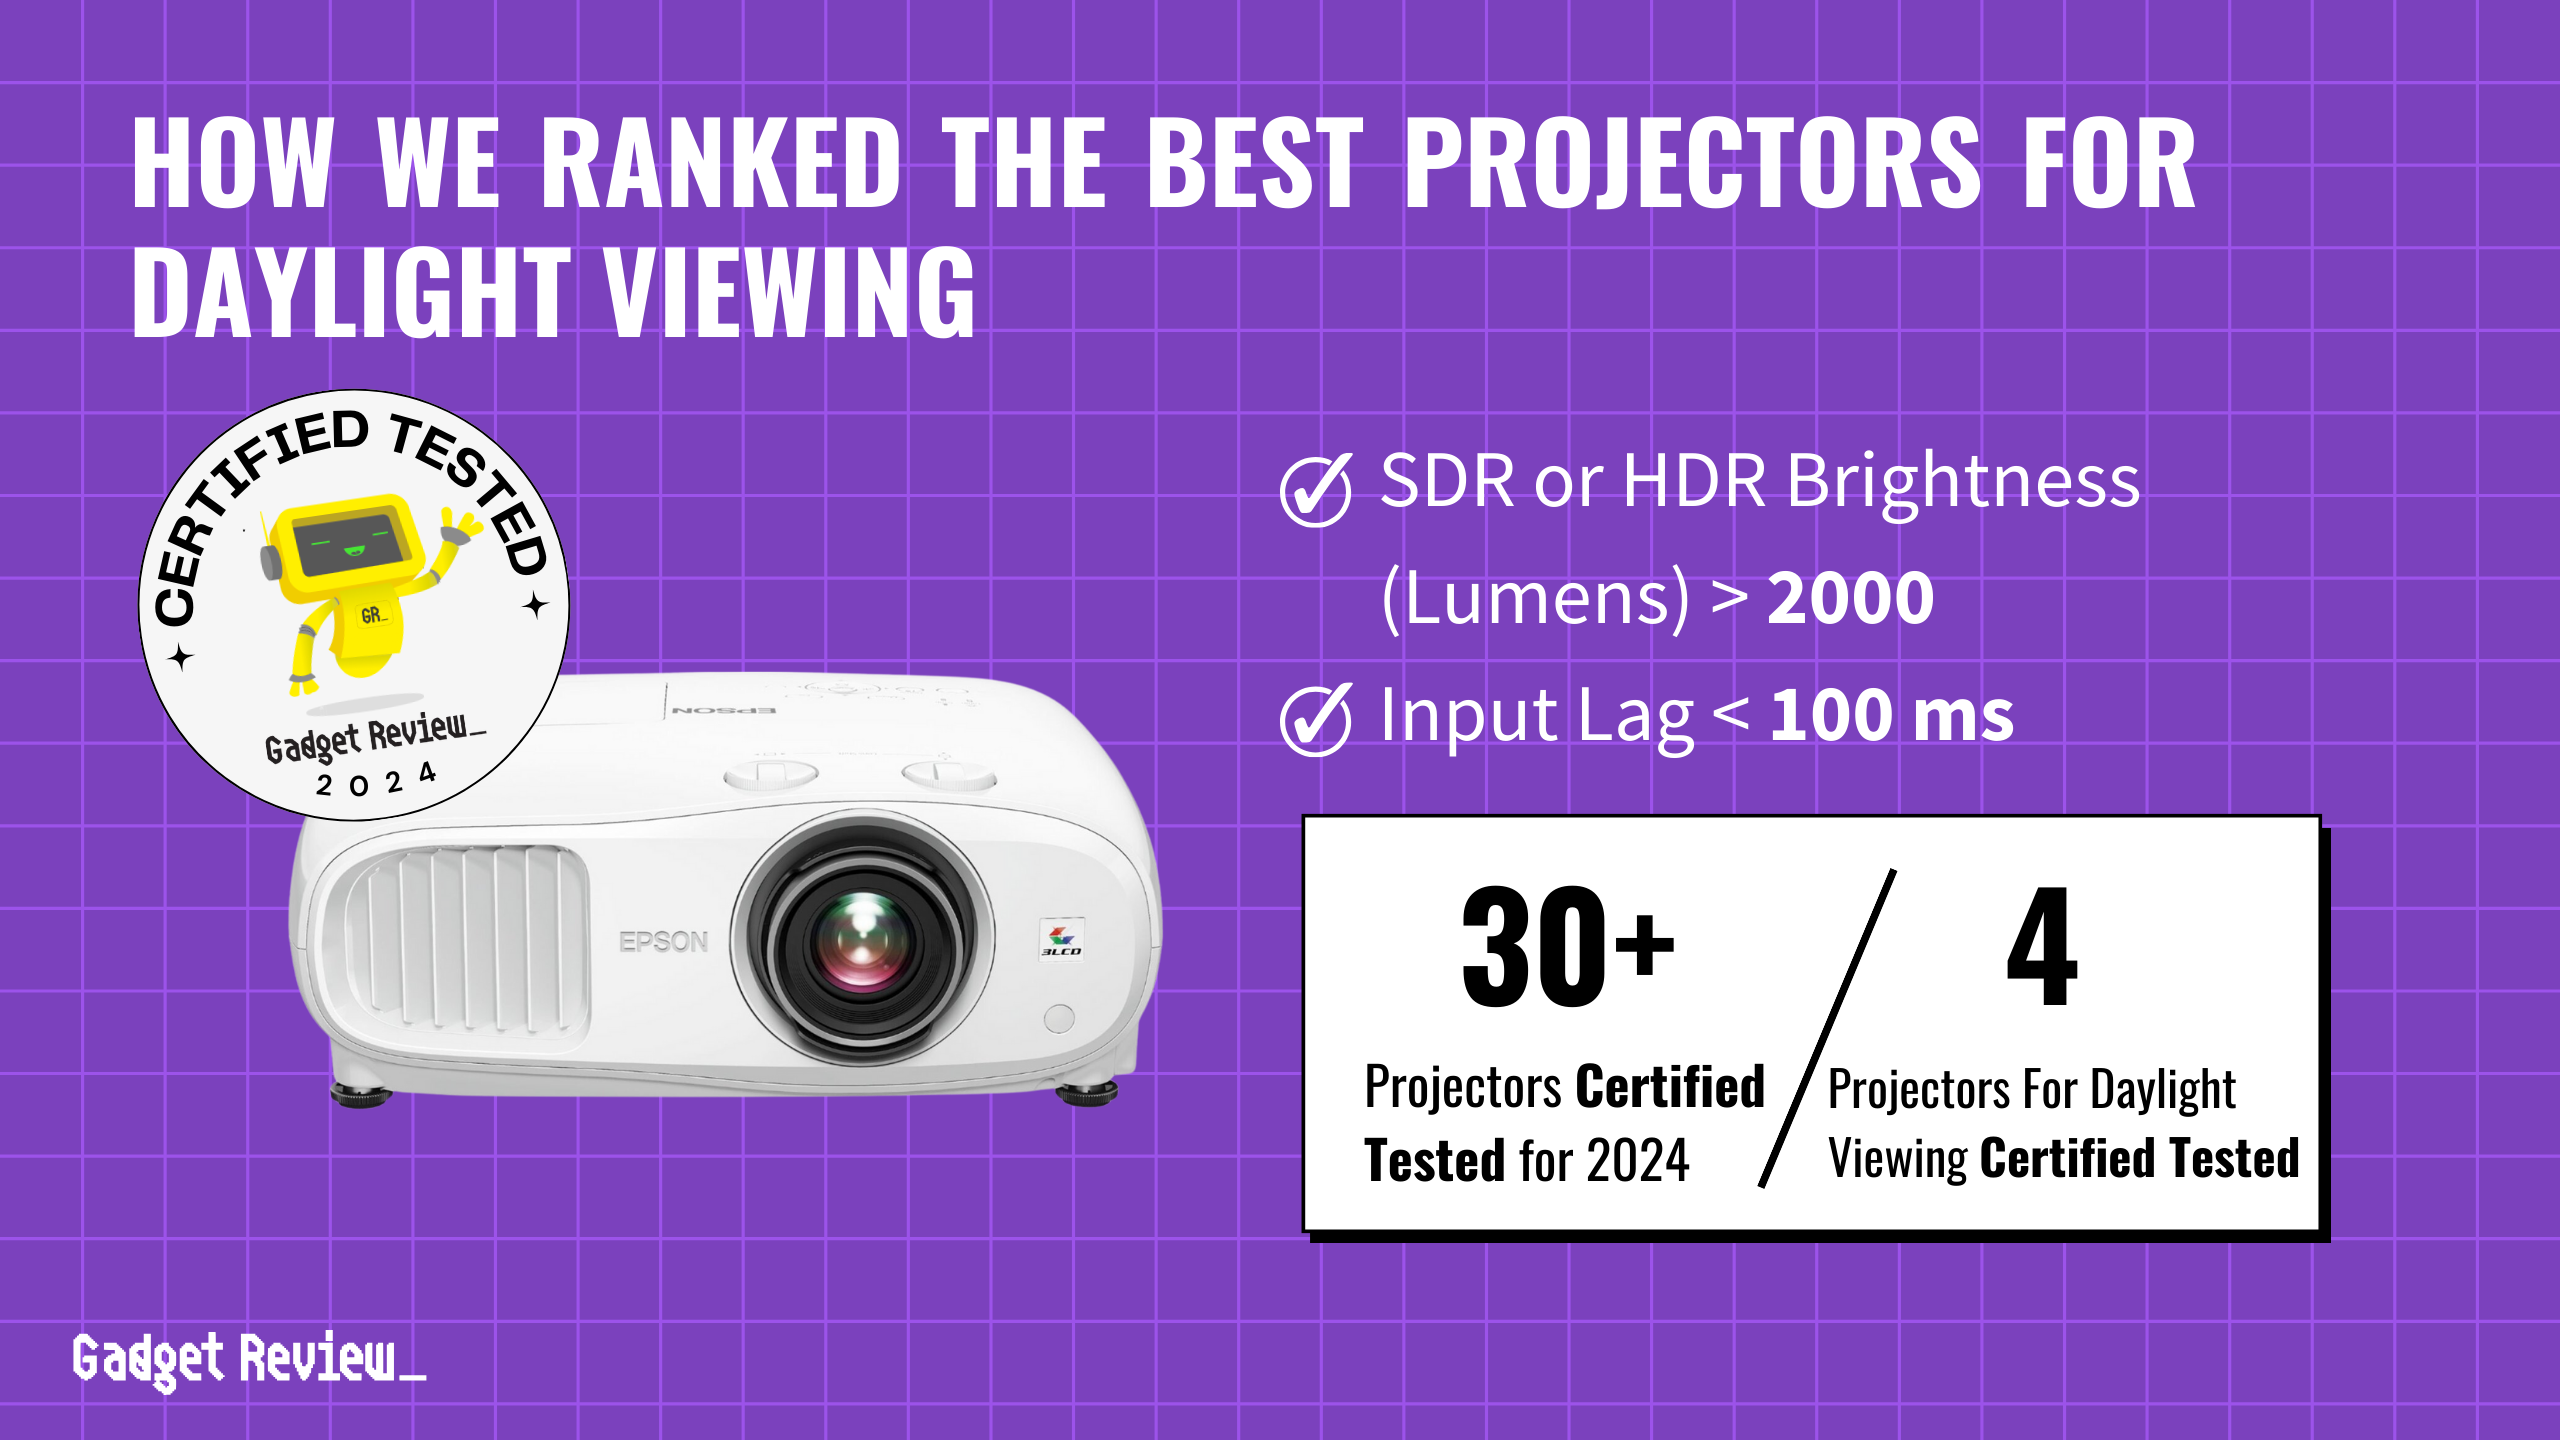 We Ranked the 4 Best Projectors for Daylight Viewing